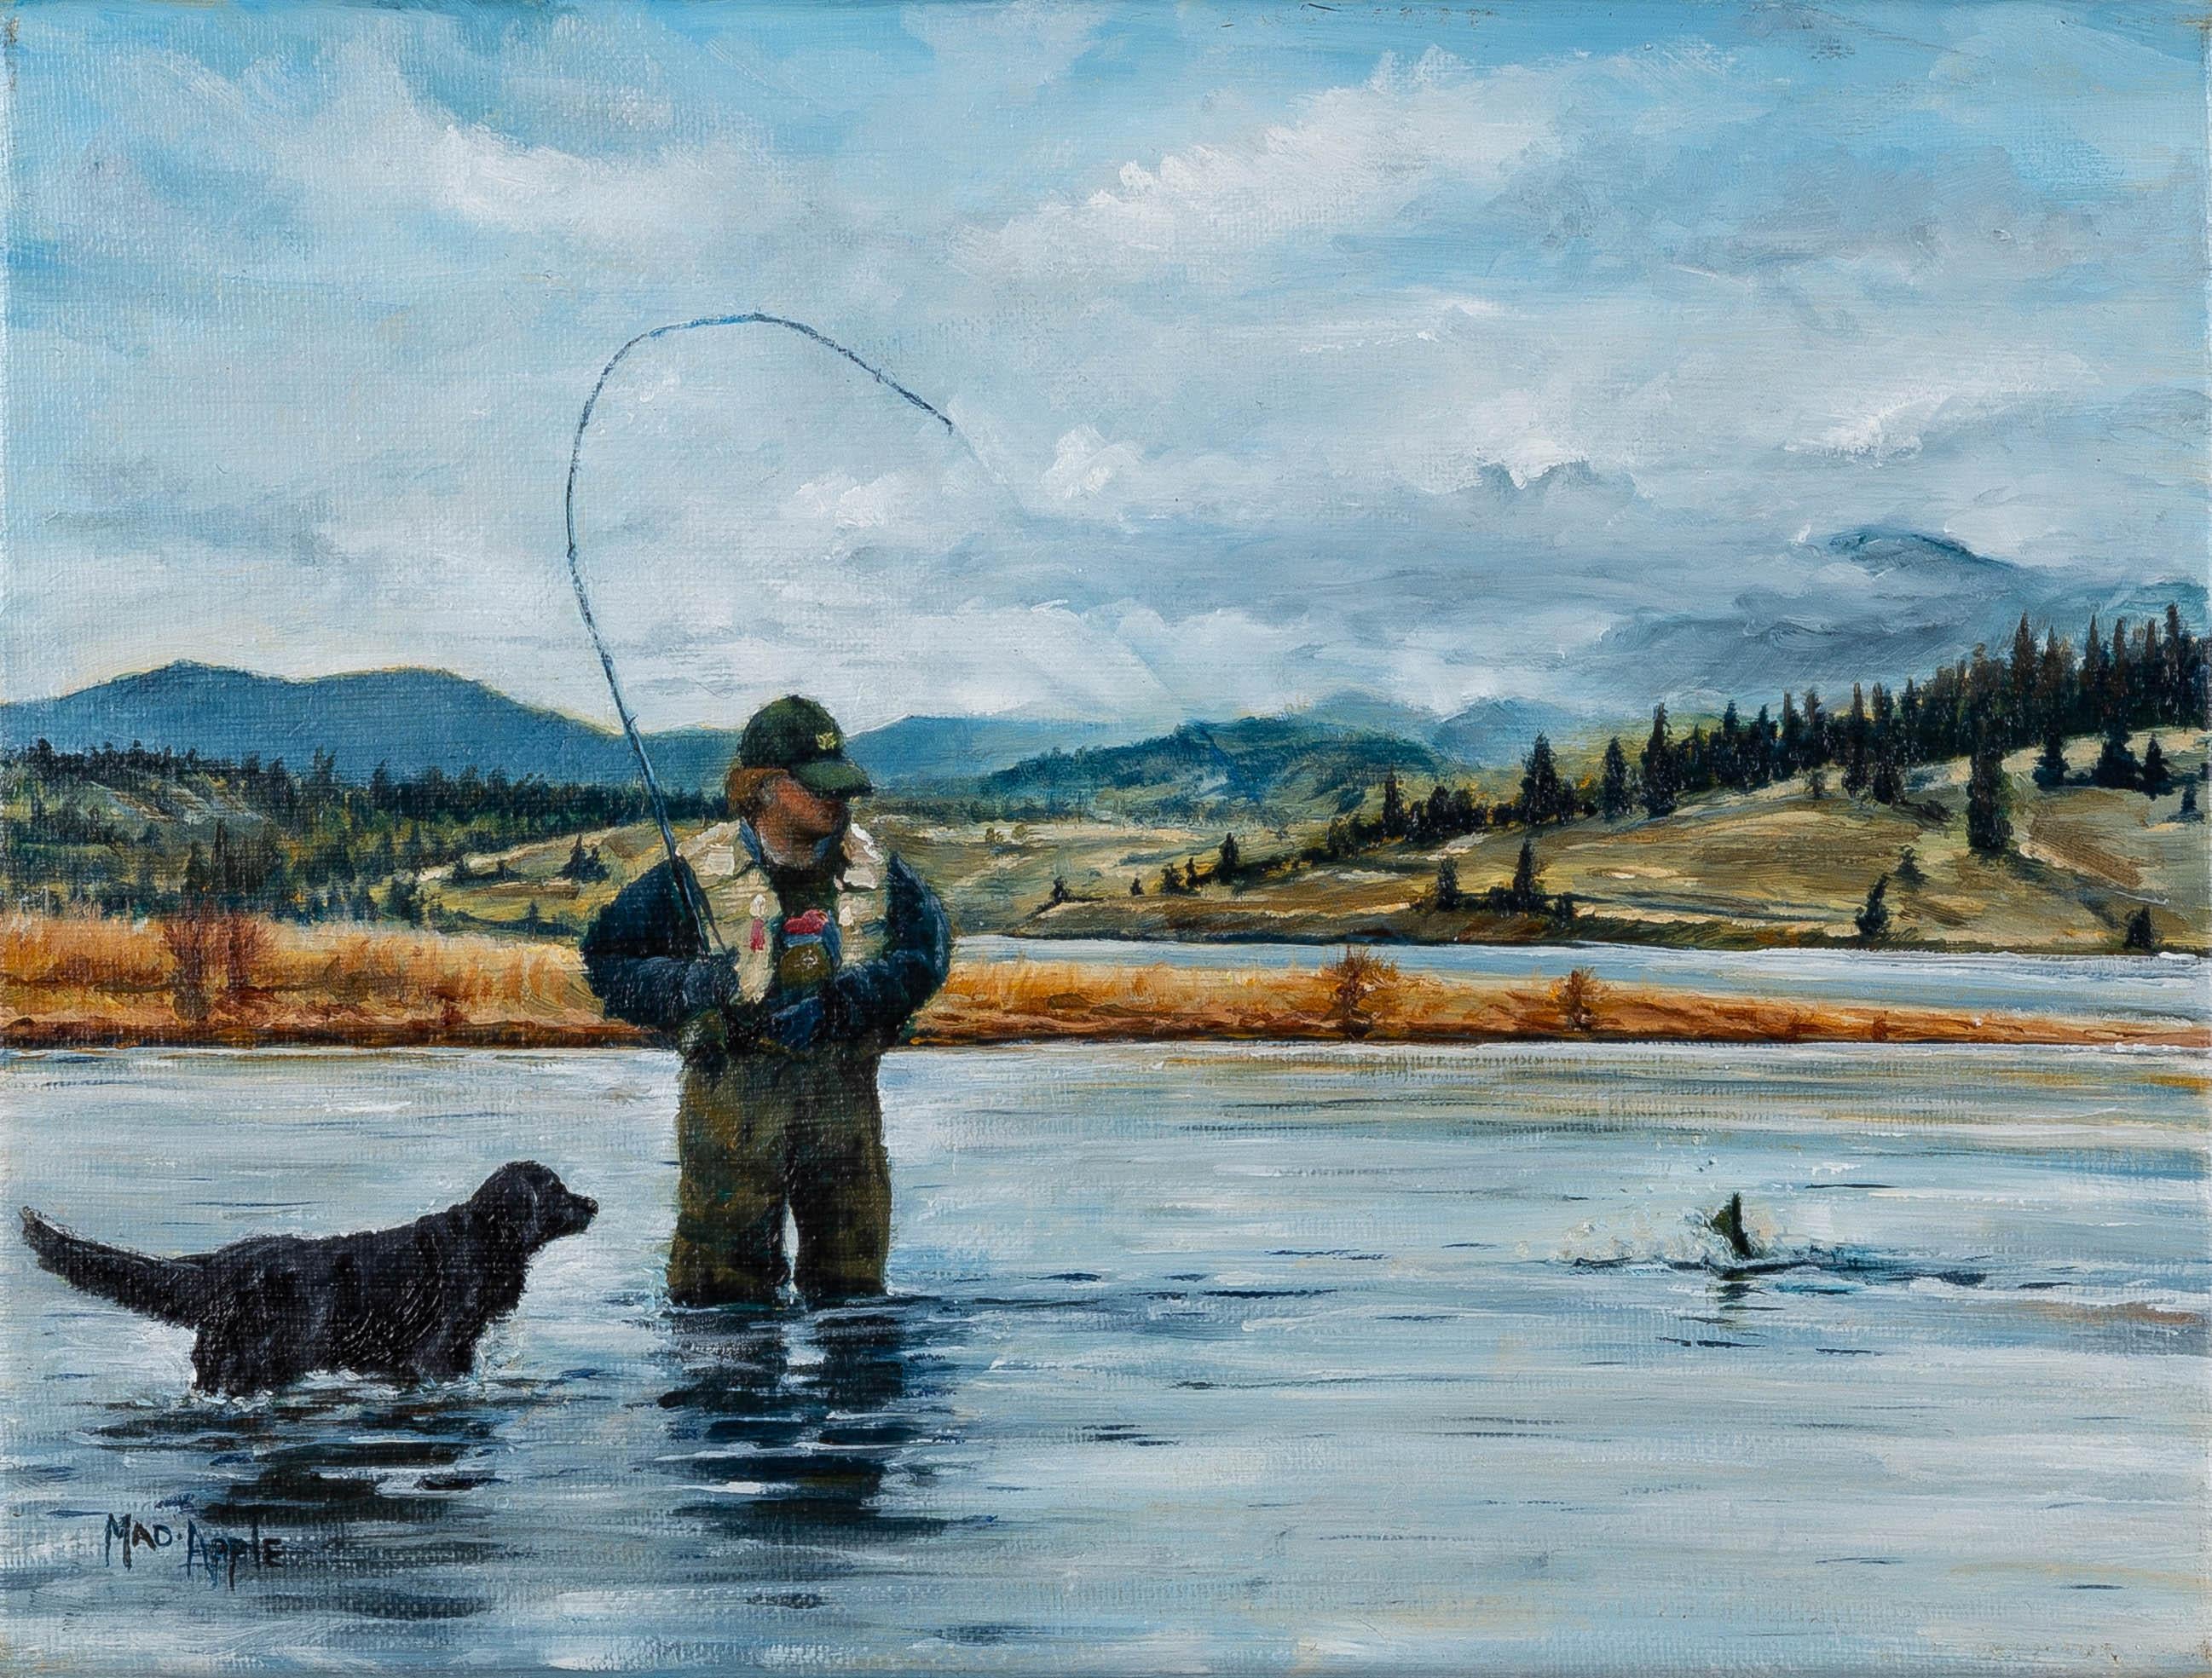 Fly Fishing With Dog Missouri River Montana Western Landscape Original Oil - Painting by Madison Apple